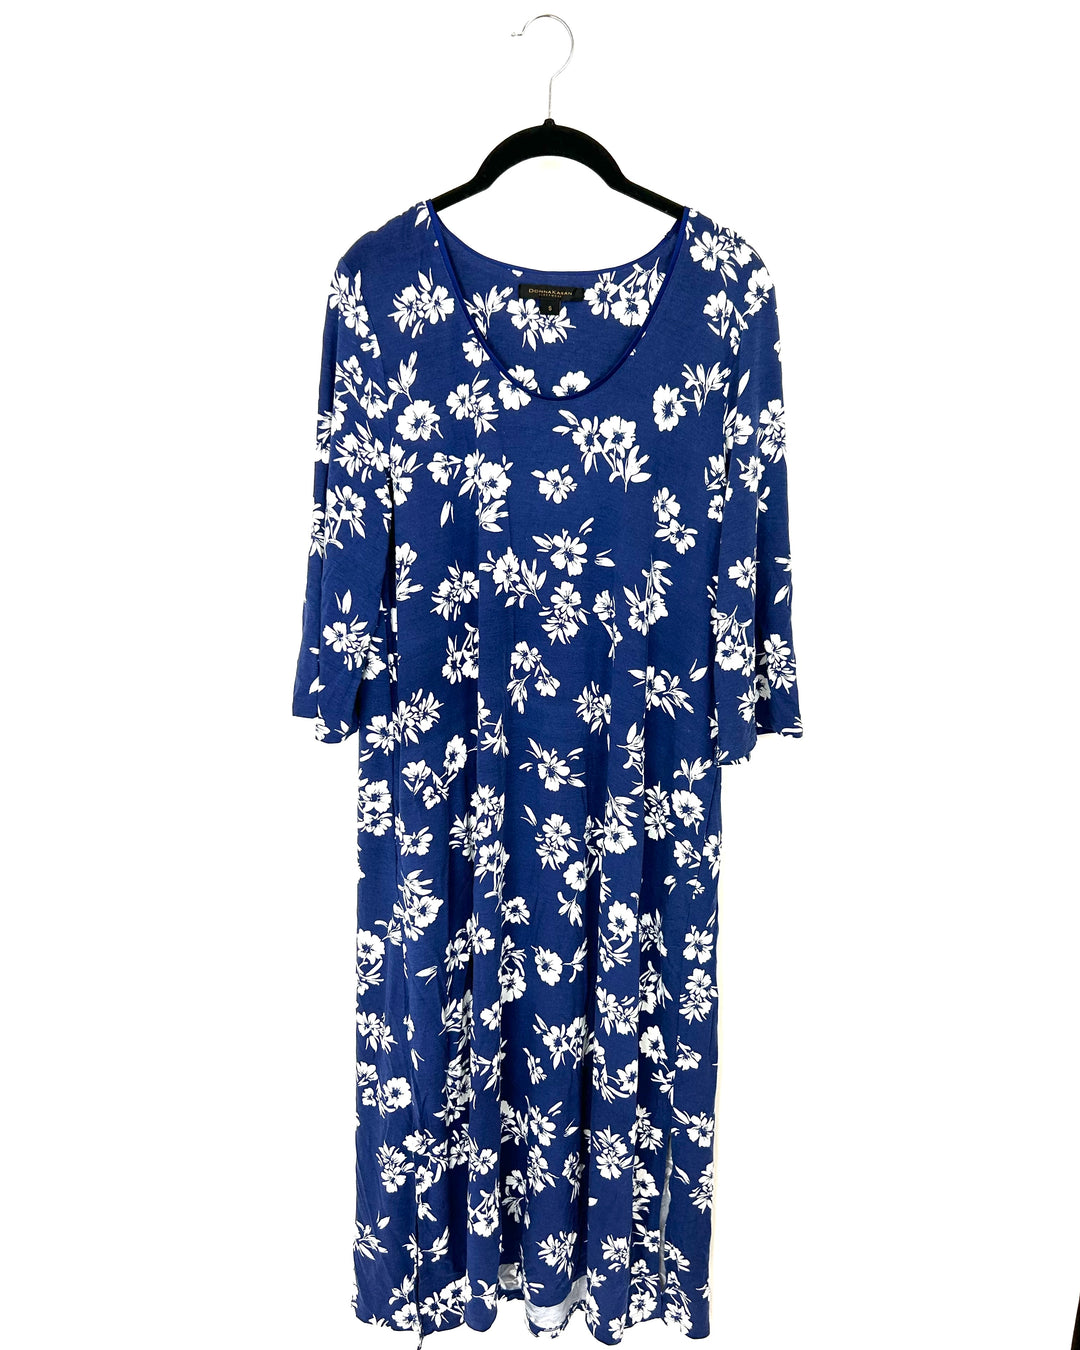 Blue And White Floral Nightgown - Size 4/6